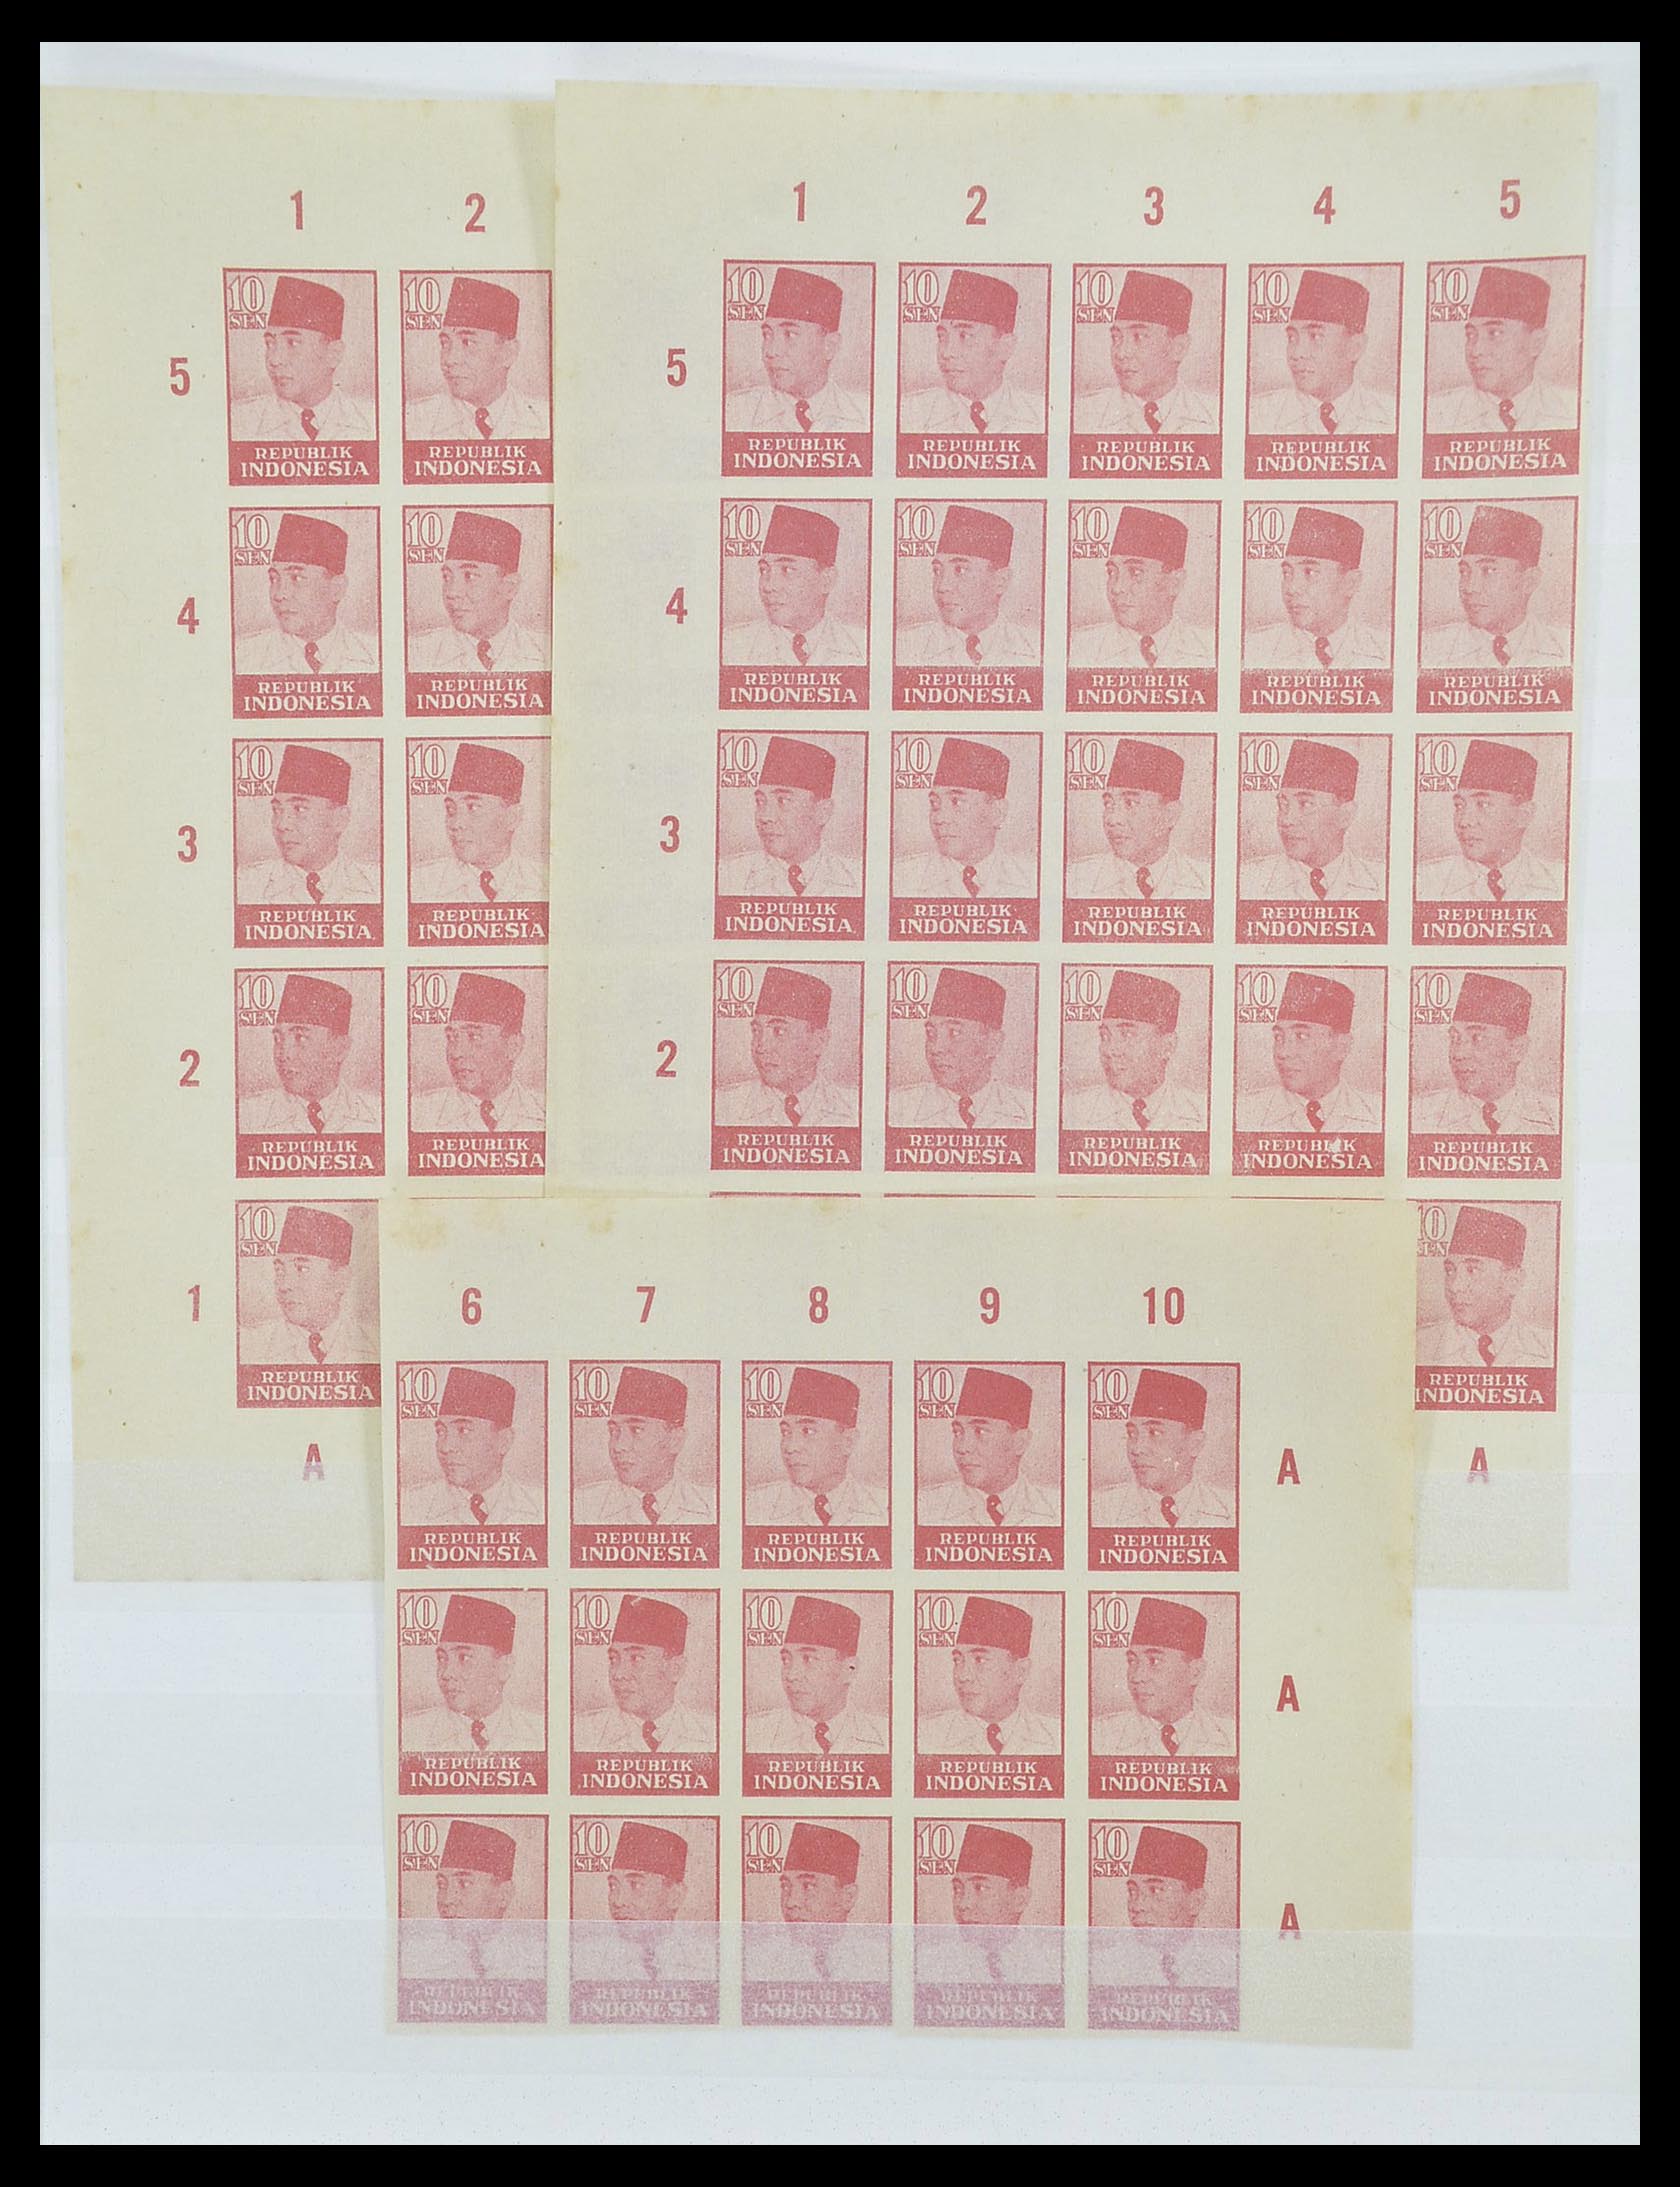 33489 015 - Stamp collection 33489 Japanese occupation Dutch east Indies and interim